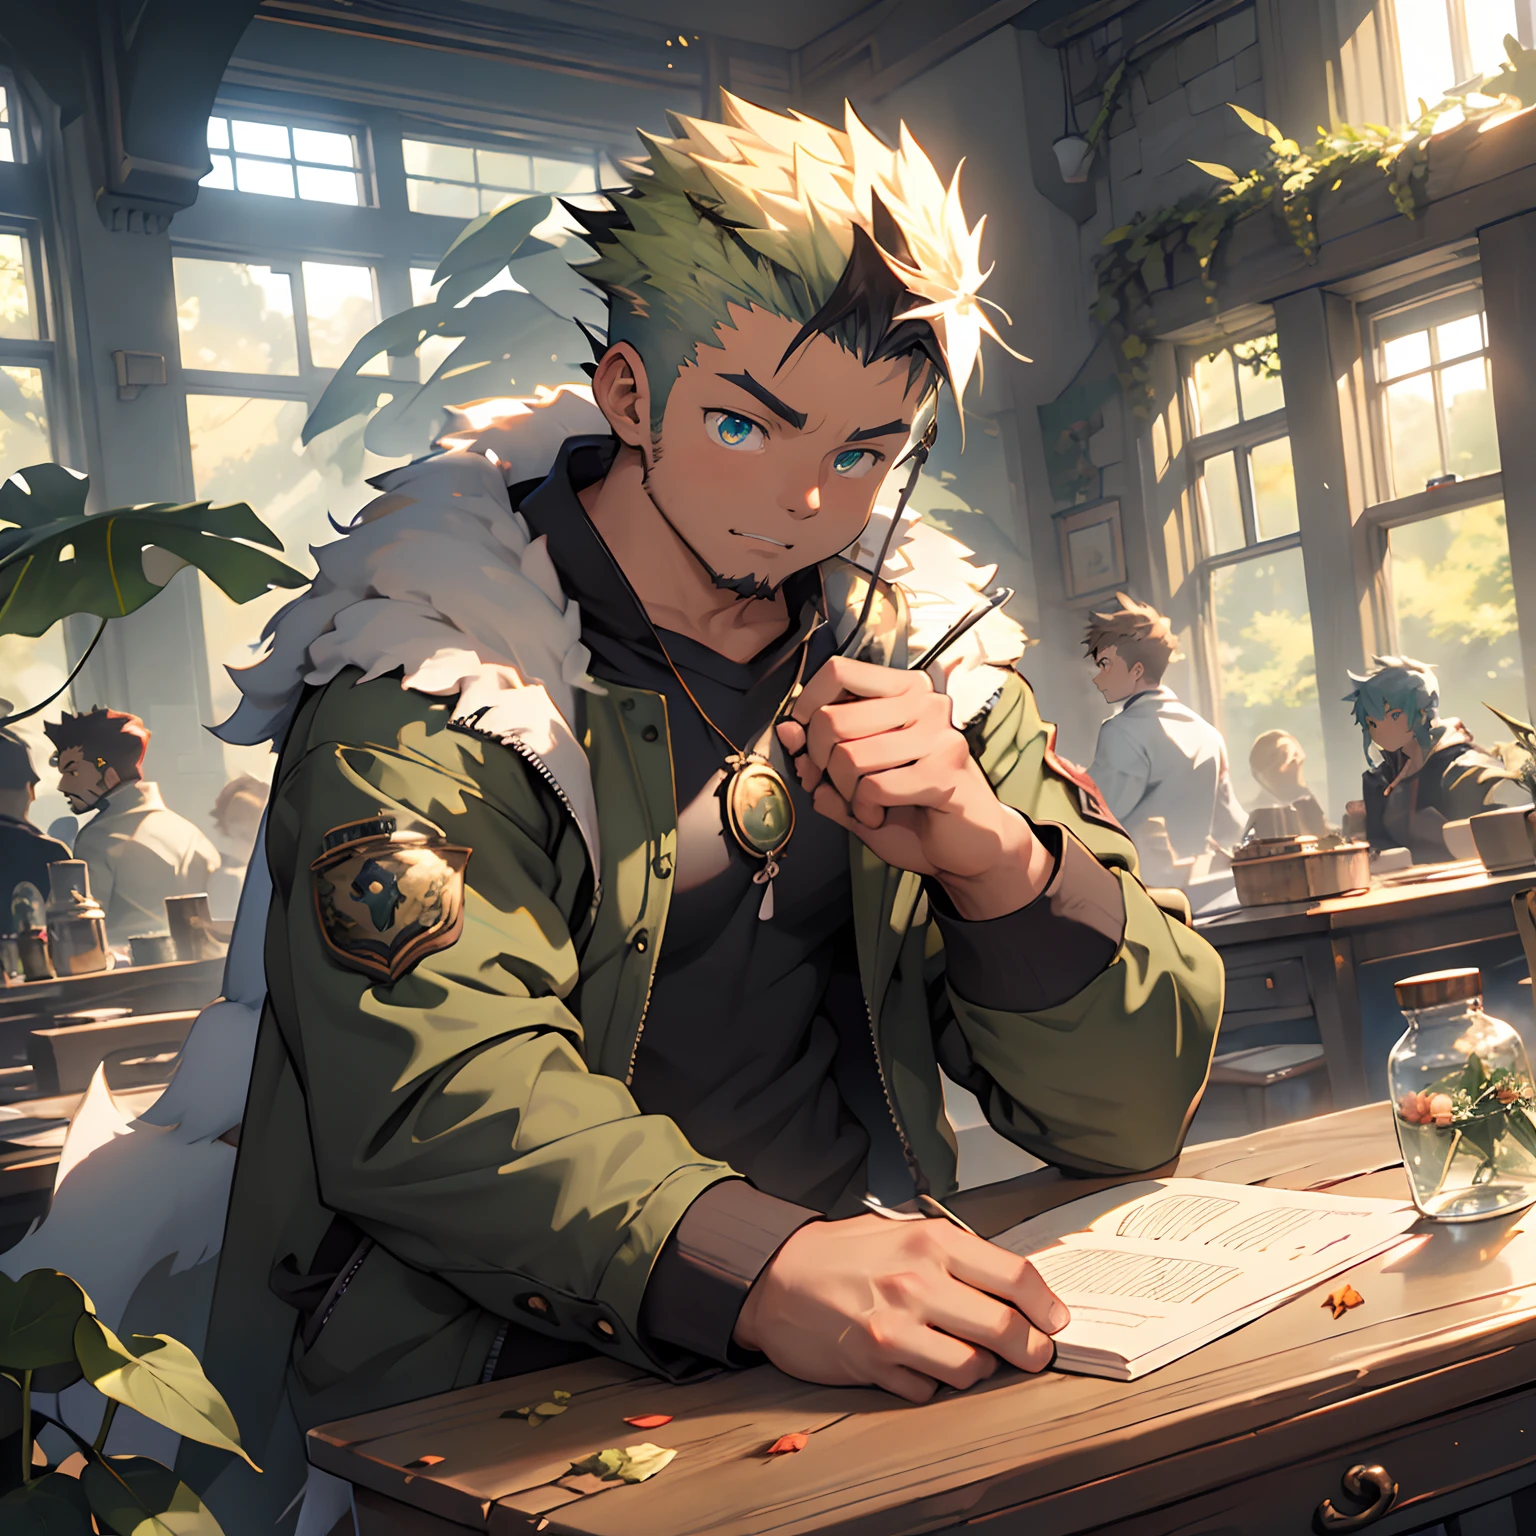 infinite mistletoe library covered ivy filled by grimoire flying leaf magically and ecosphere jar at alchemy laboratory black forest, super high resolution kawaii moe anime 8k, undercut, faux hawk, naked super buff muscular magician bent knees wear futuristic jacket on shirtless, spelling medicine hard tenting the crotch wood straddling the ecosphere jar with spread-eagle to manspreading over male seeds, rossdraws global illumination, trending on artstation pixiv, kawaii moe anime